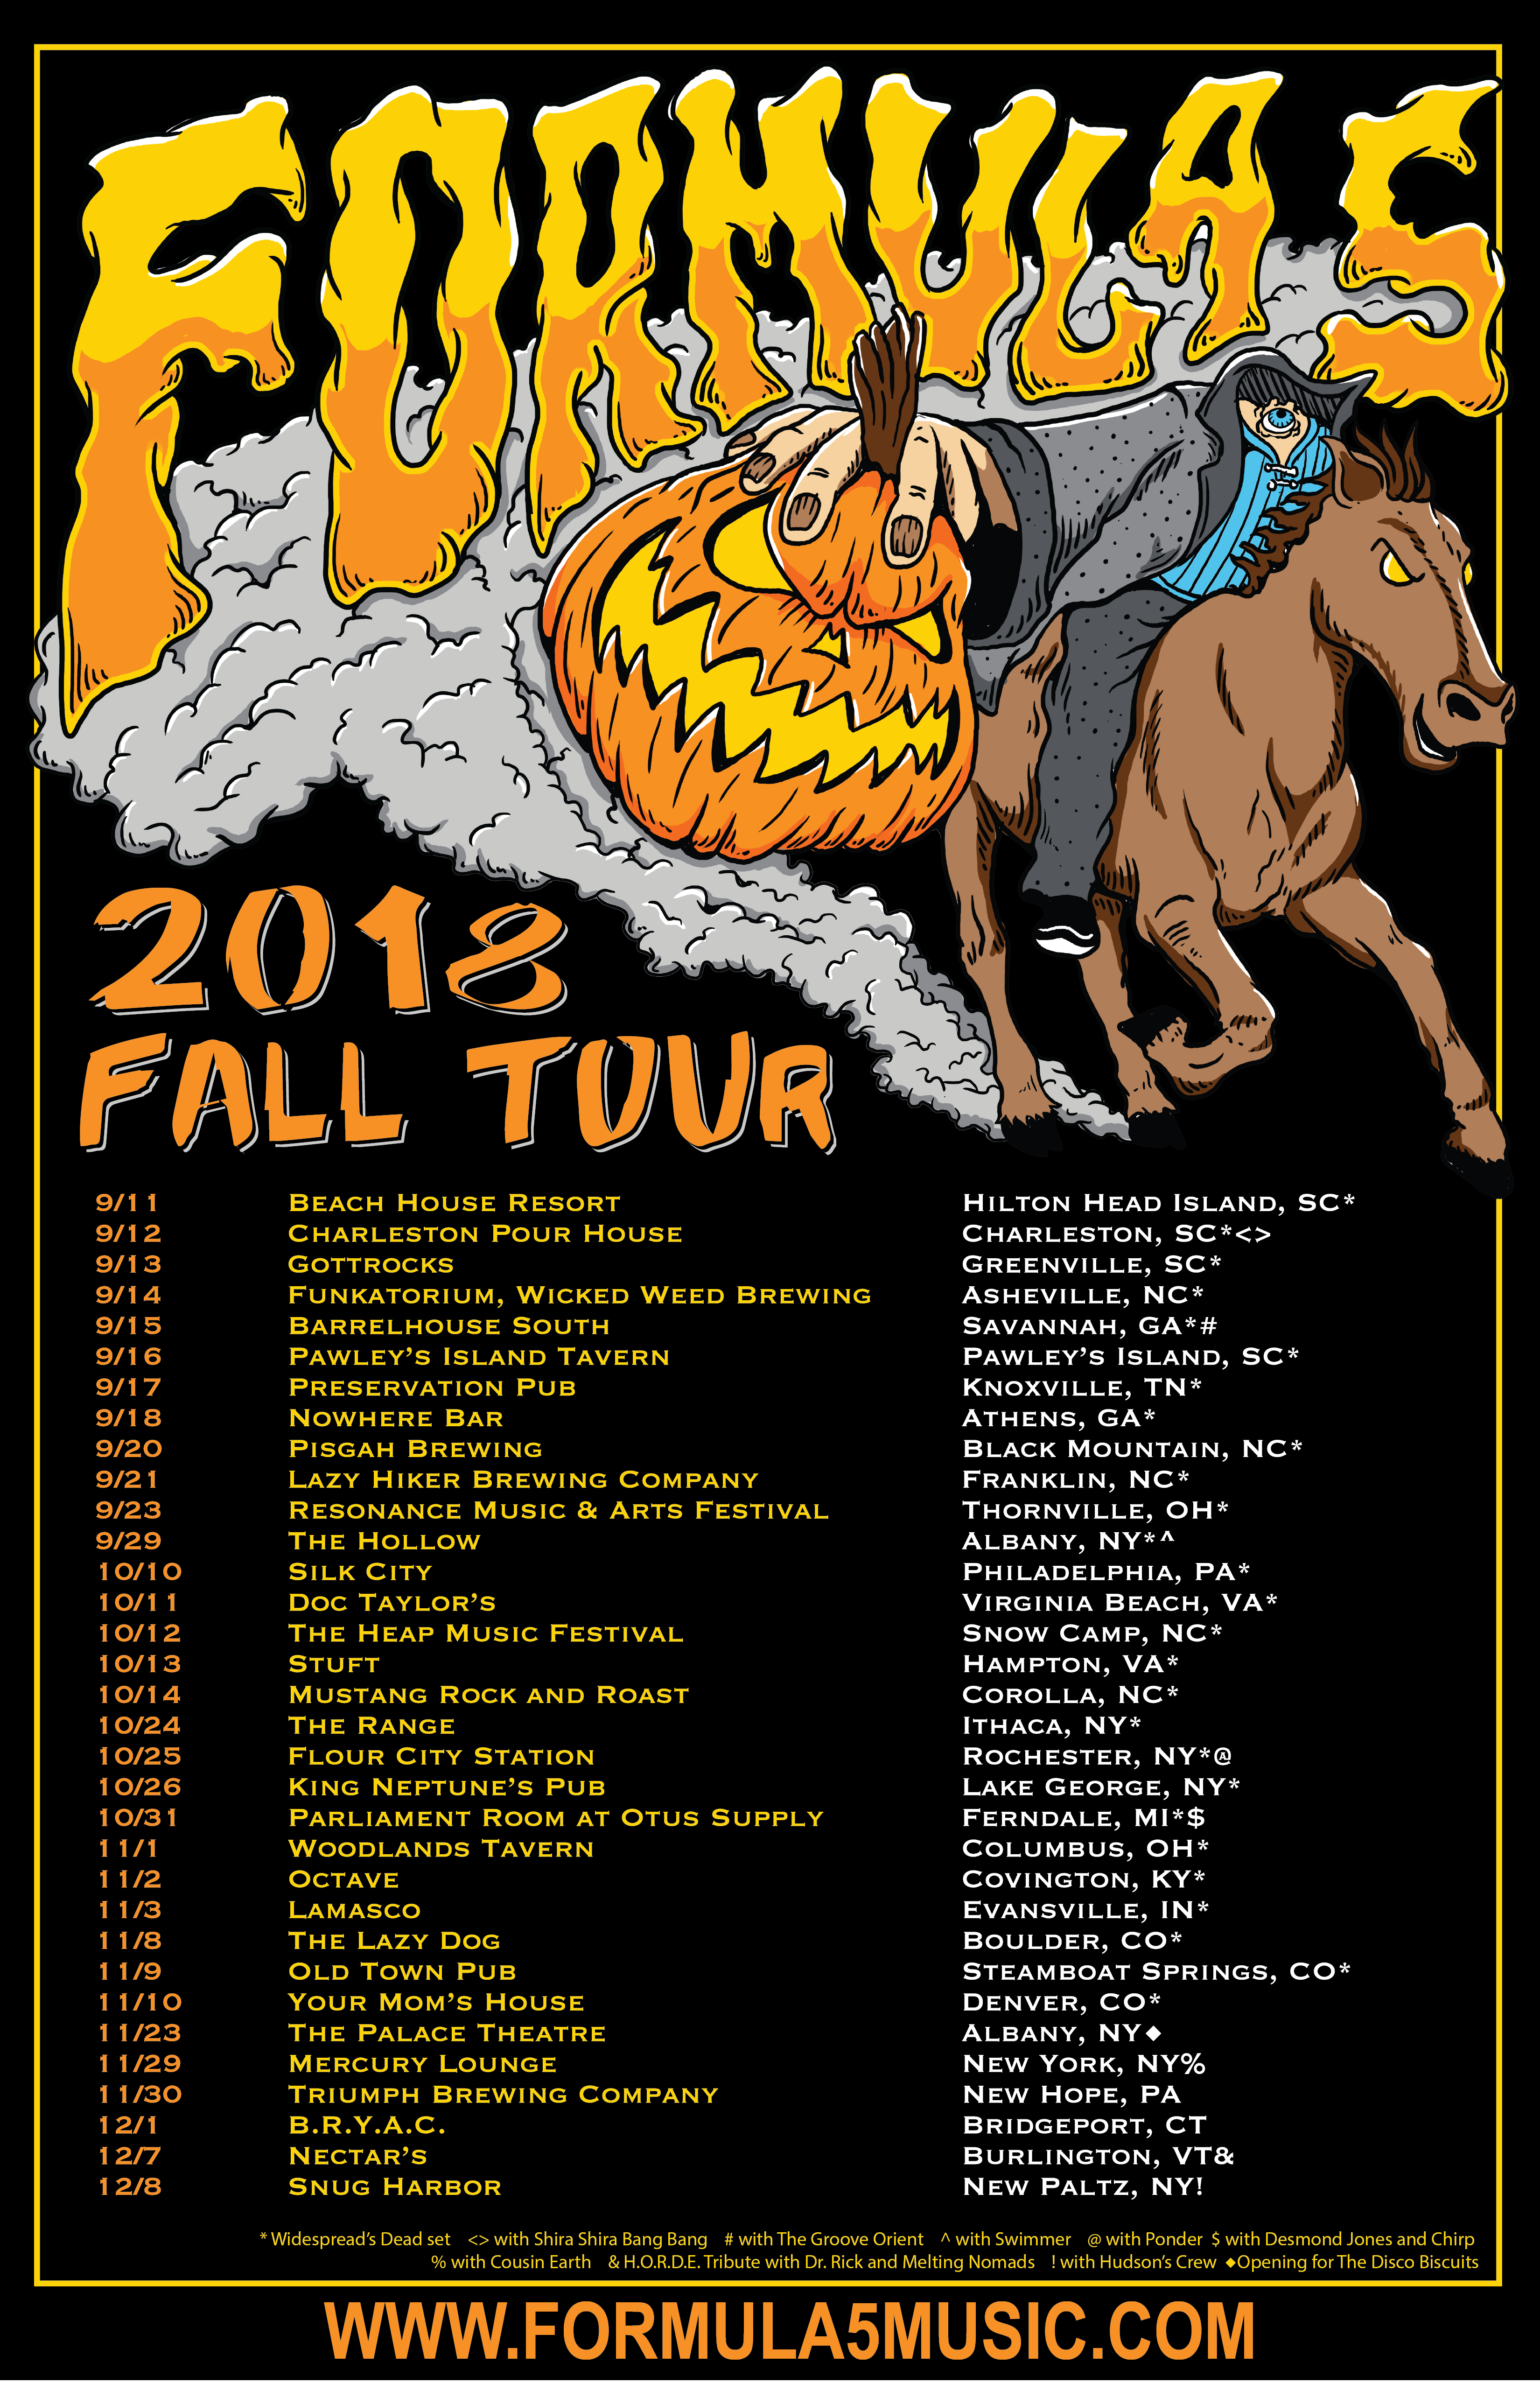 Formula 5 Announces Additional Fall Tour Dates featuring sets of ‘Widespread’s Dead’